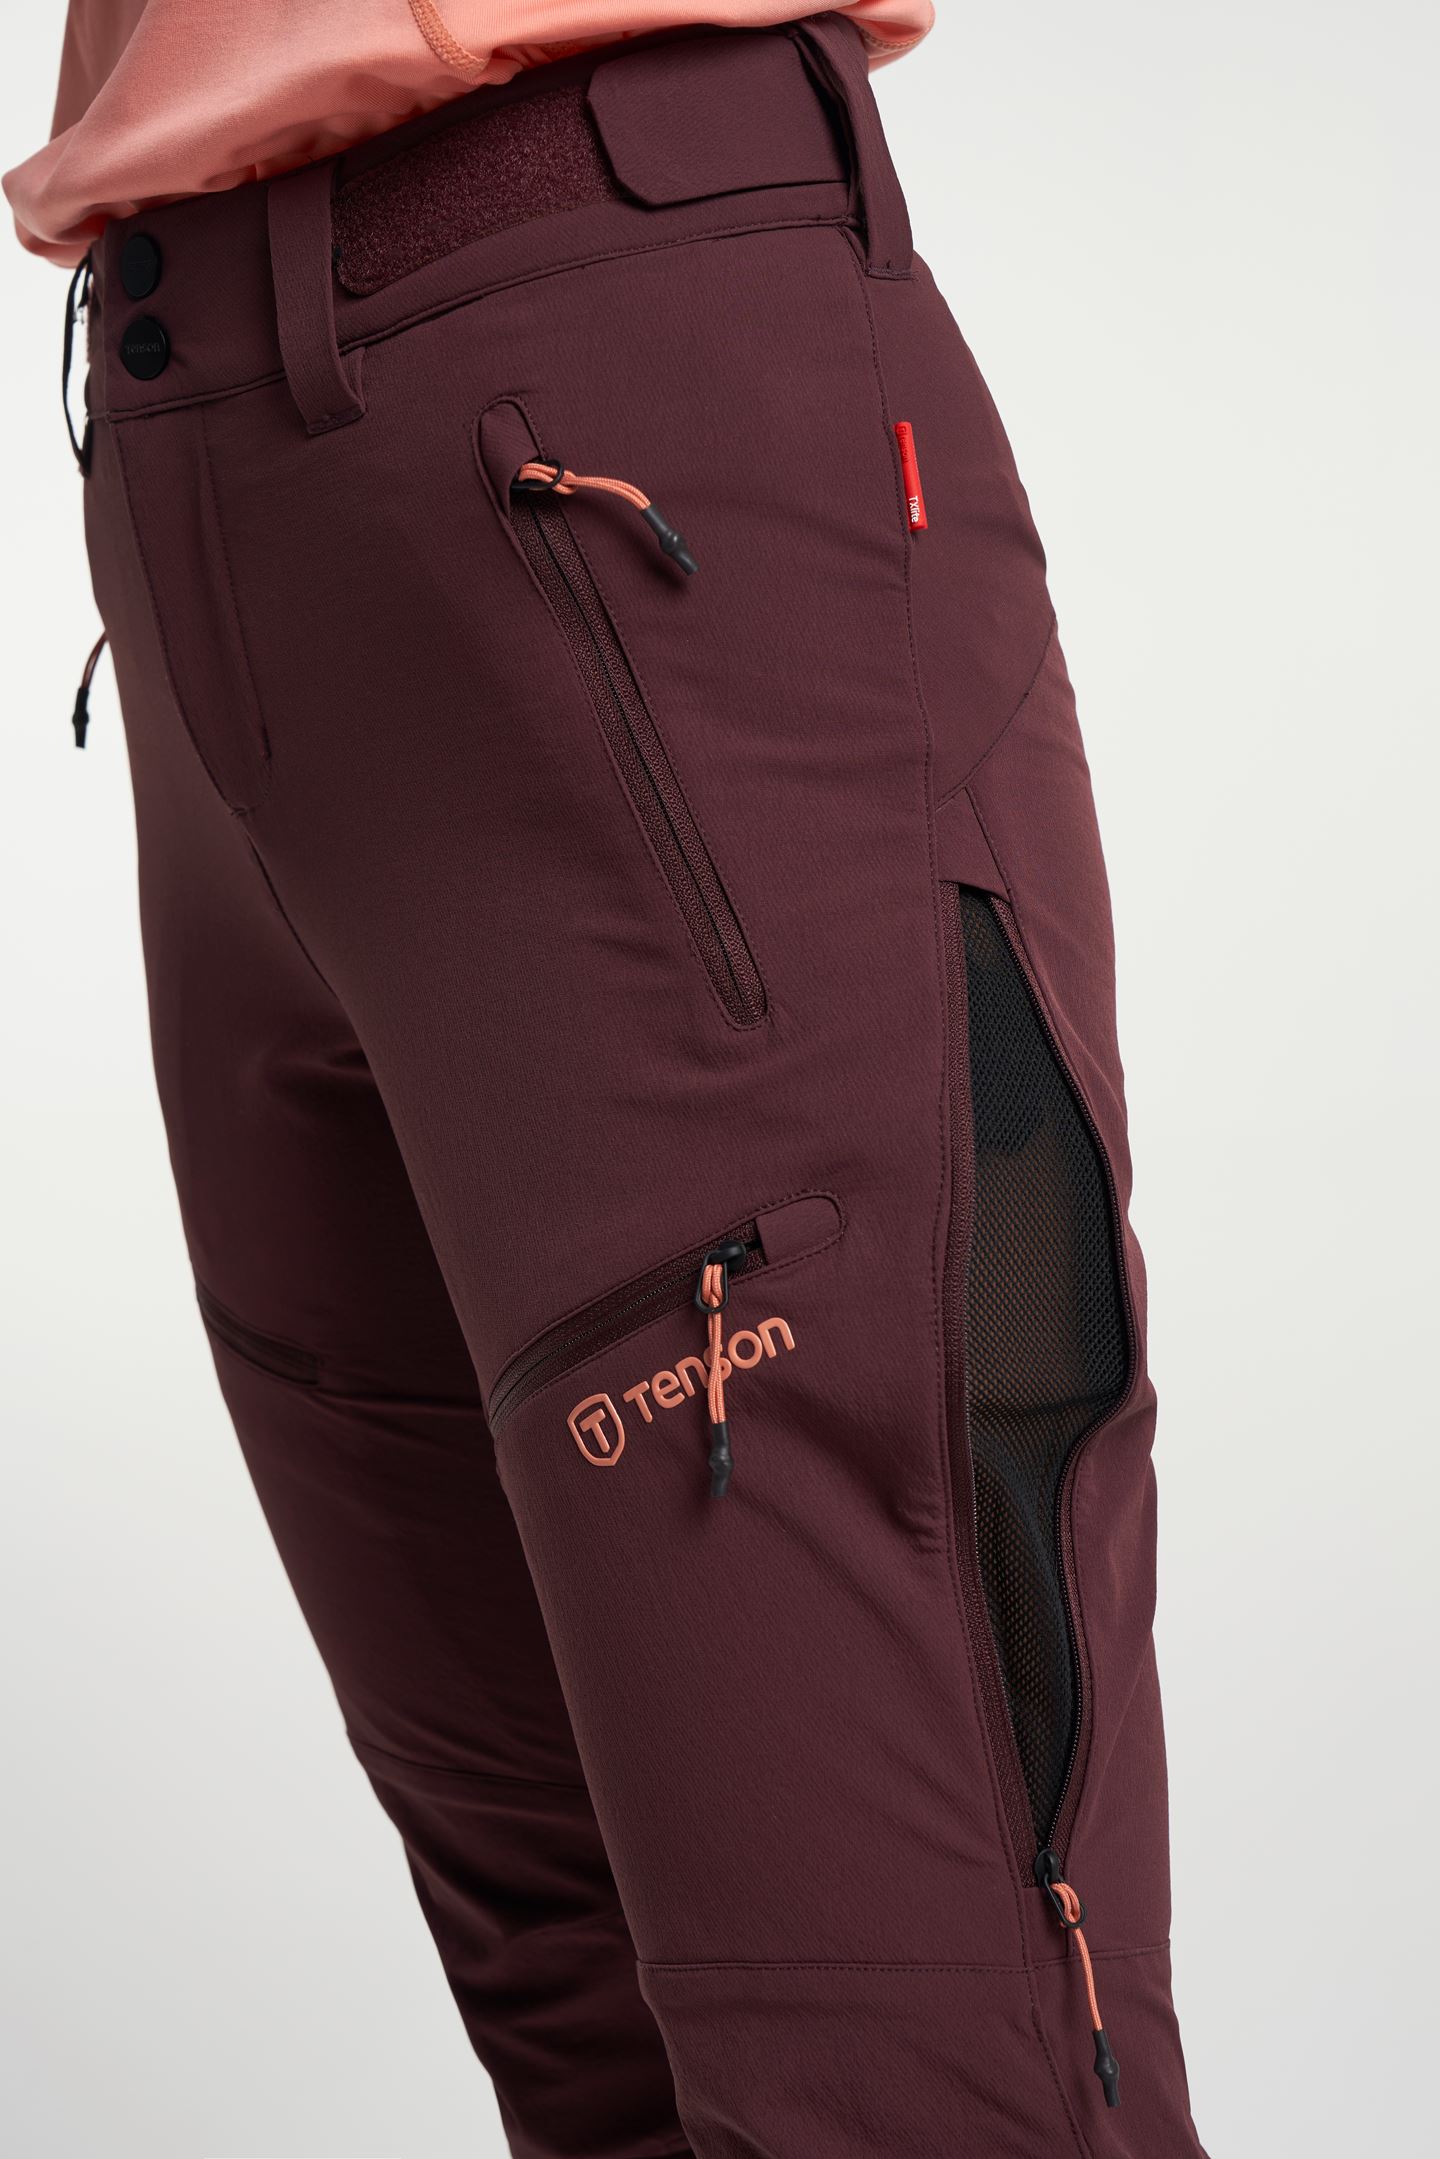 Tour Softshell Pants - Ski Touring Softshell Trousers for Women - Beetle